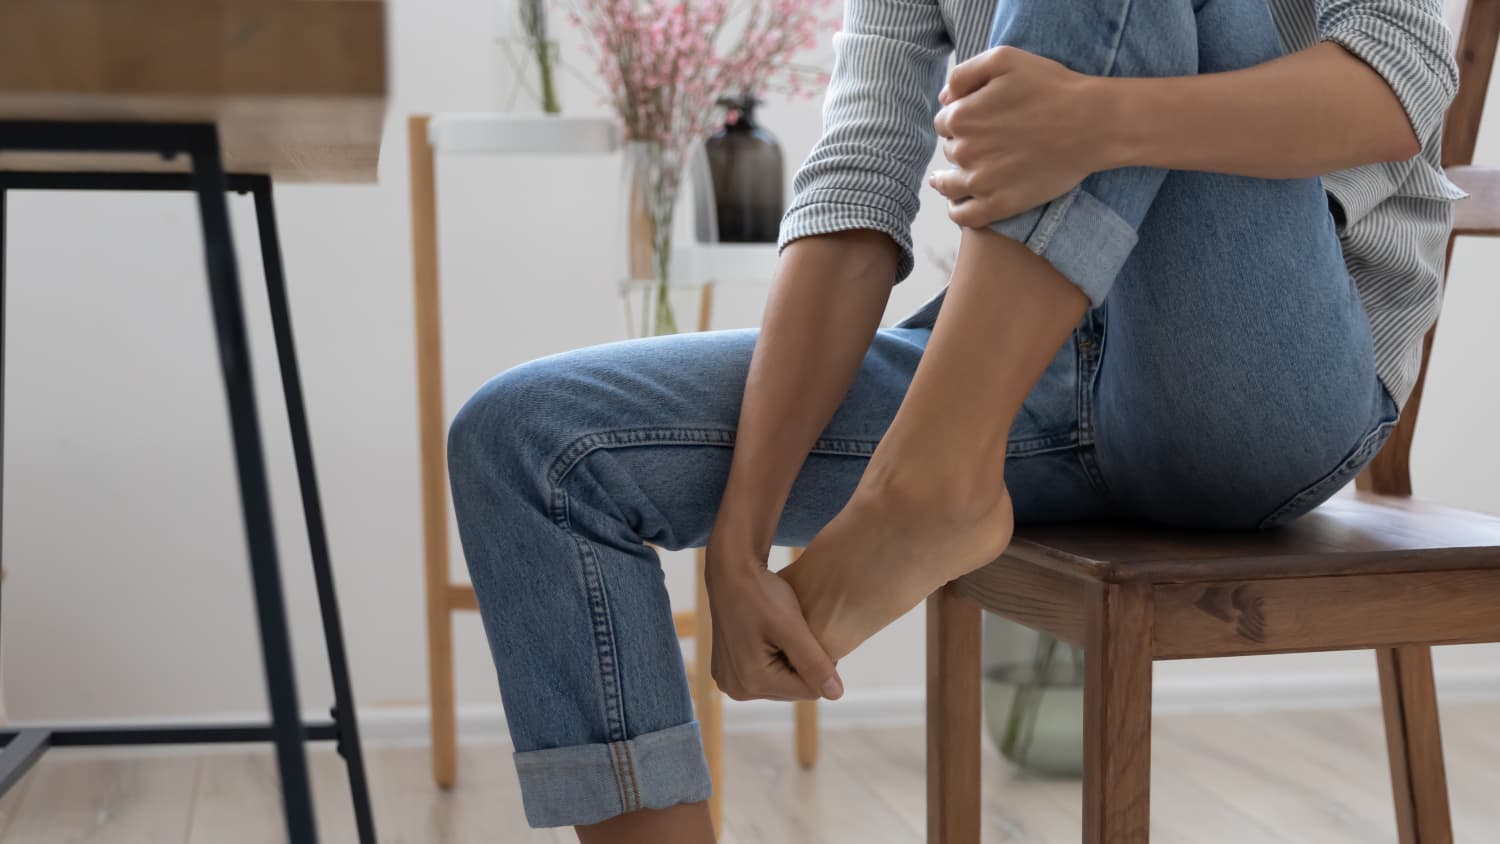 woman sitting in chair with foot pain, possibly from tendonitis or plantar fasciitis